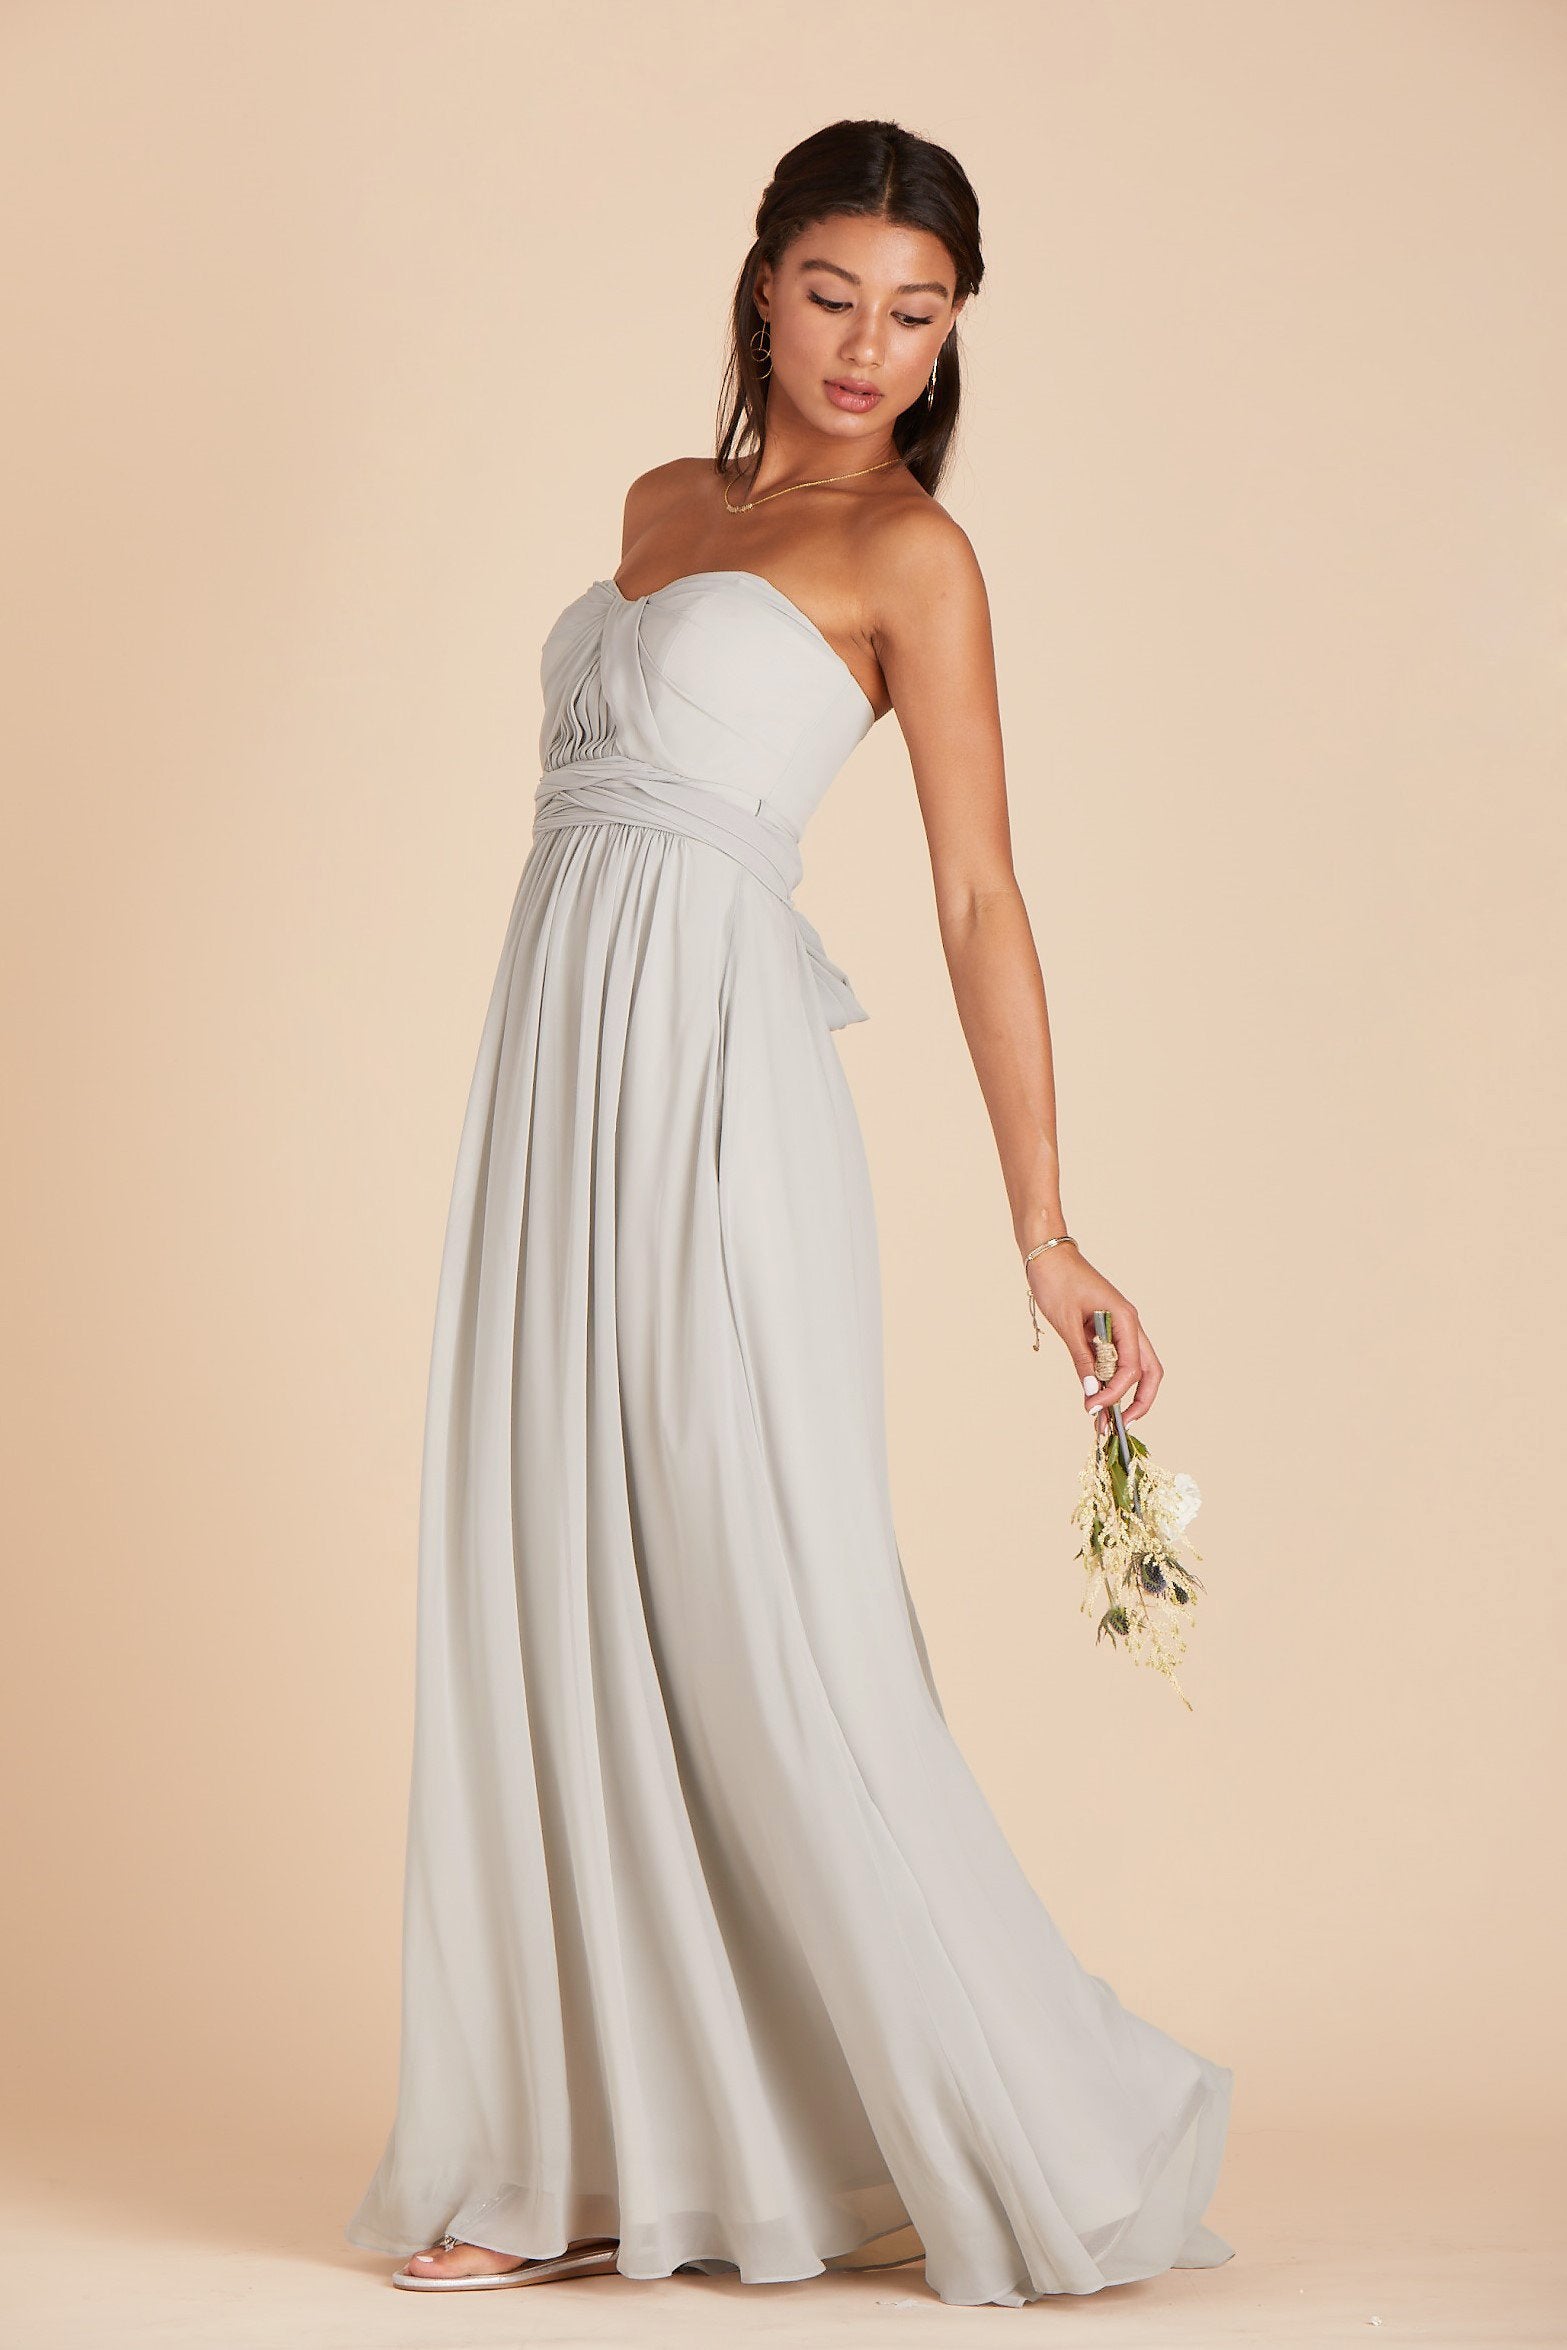 Grace convertible bridesmaid dress in dove gray chiffon by Birdy Grey, side view